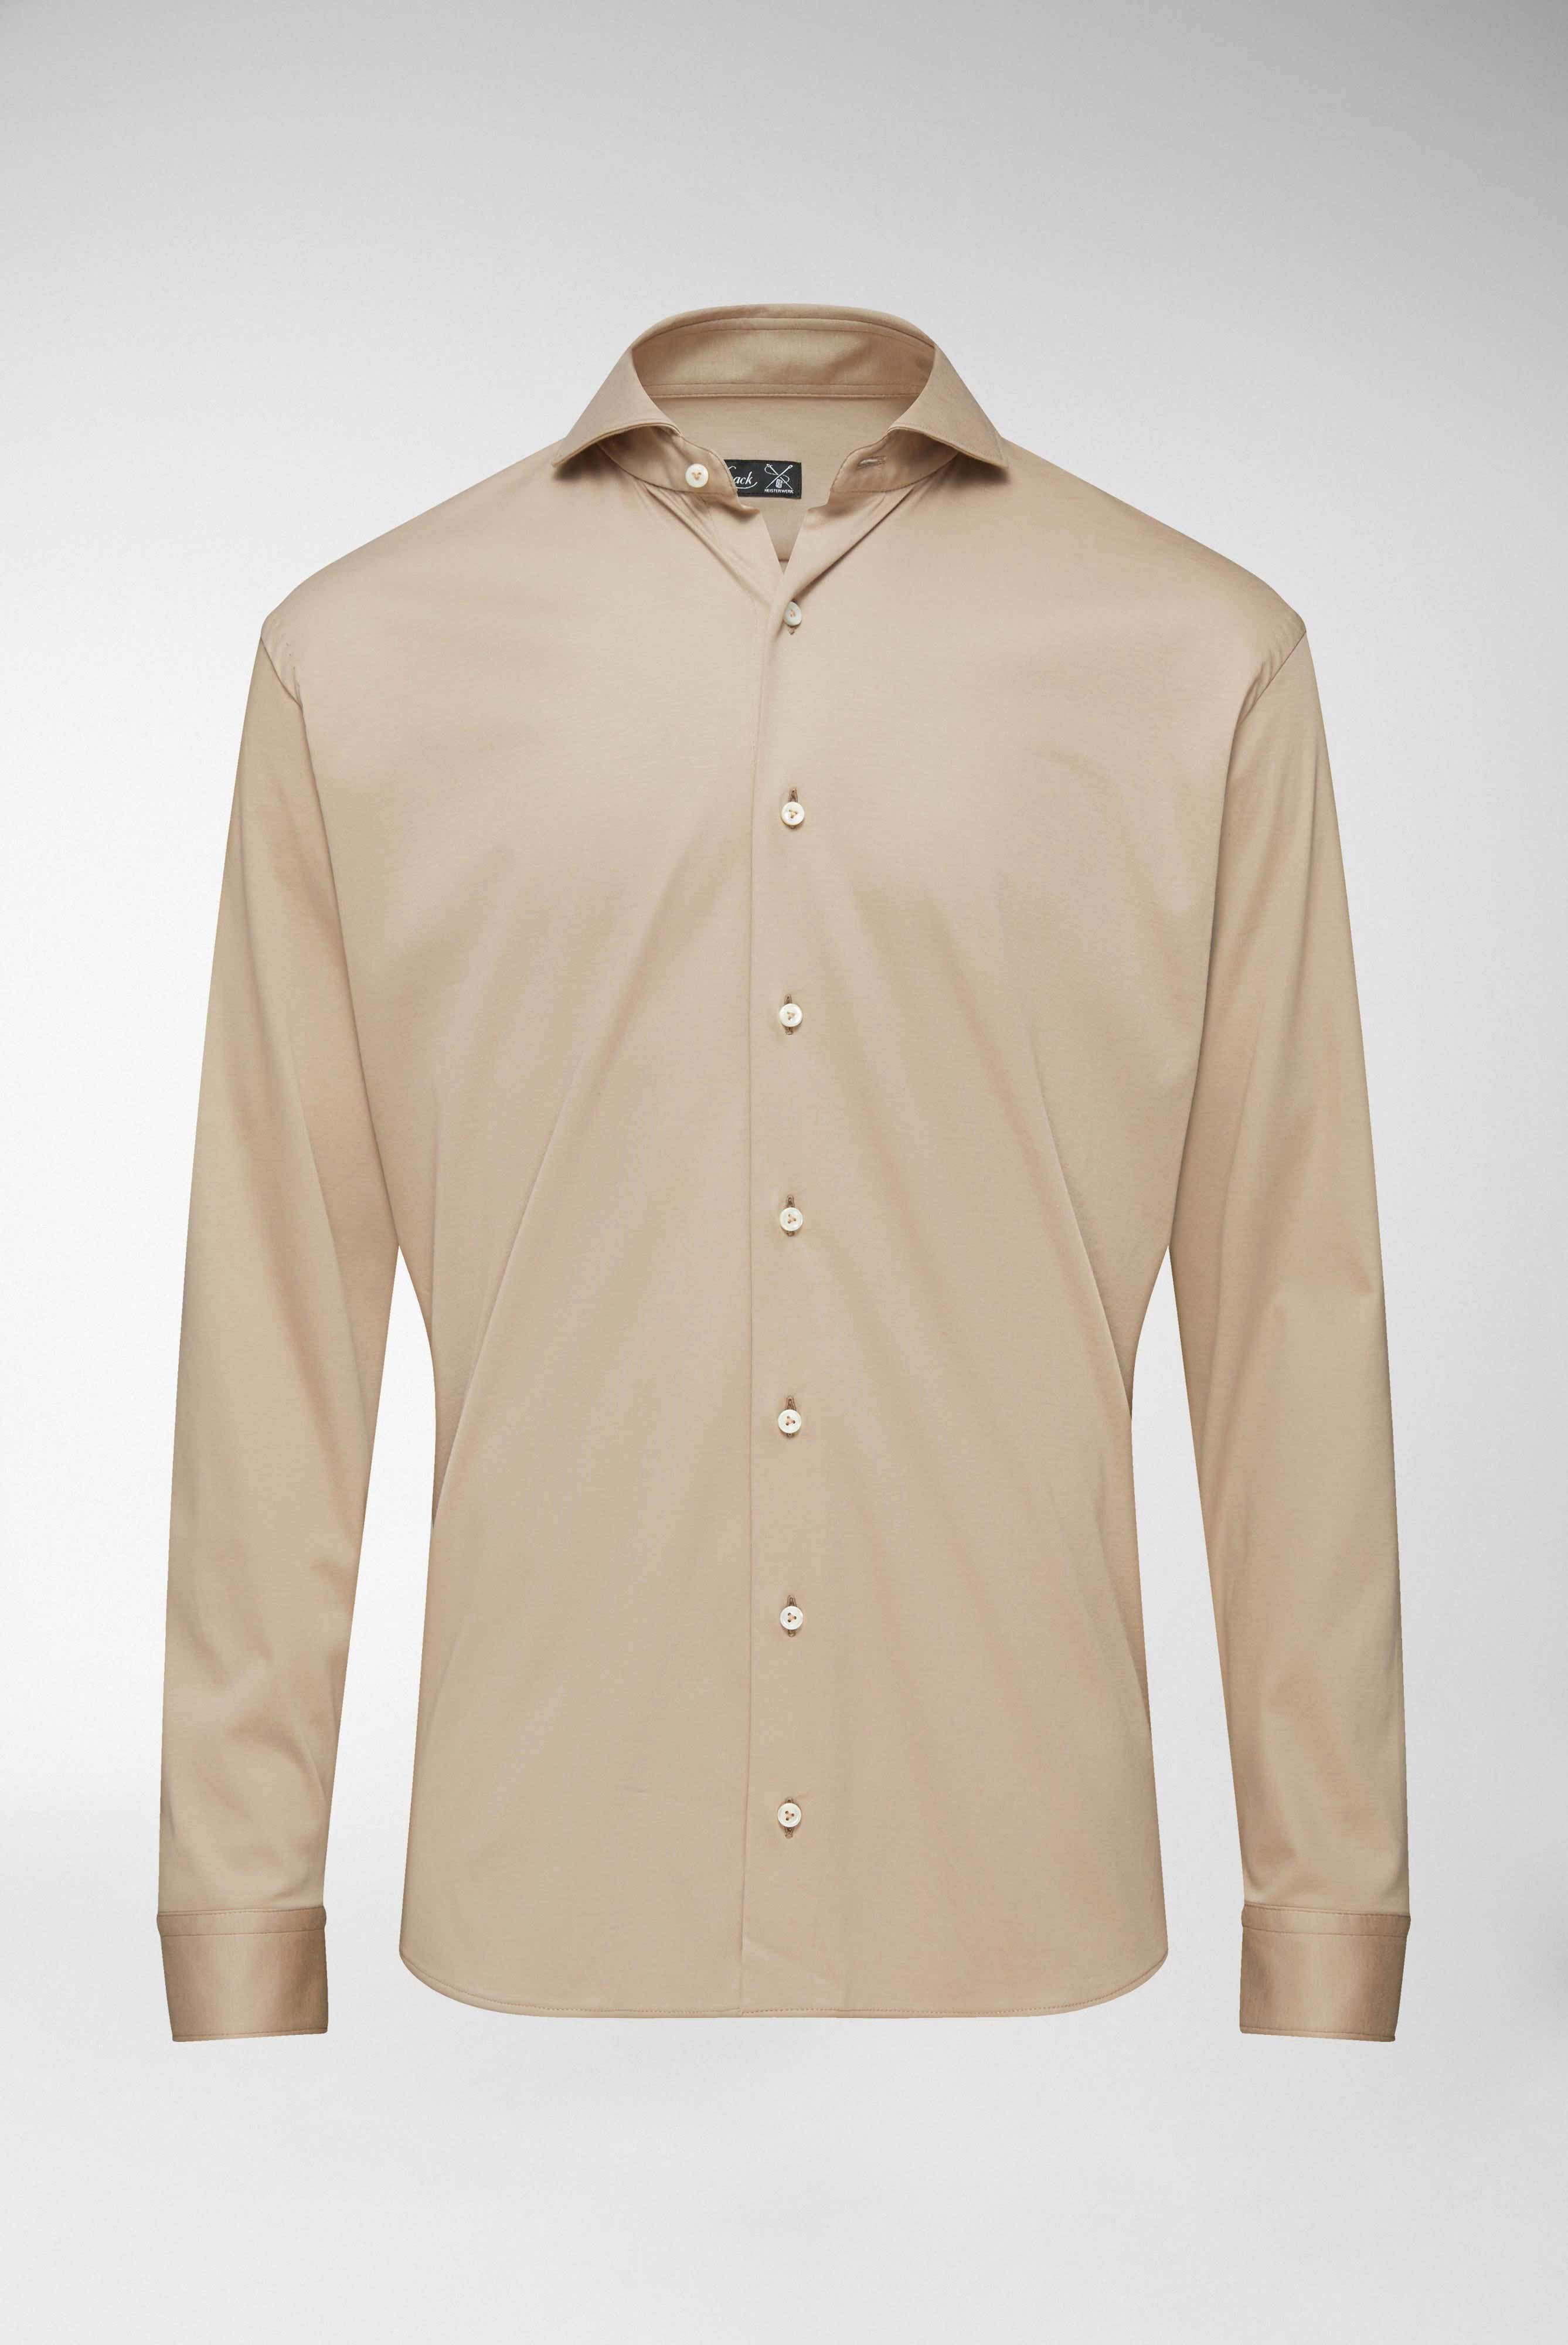 Casual Shirts+Jersey Shirt Swiss Cotton Tailor Fit+20.1683.UC.180031.140.L